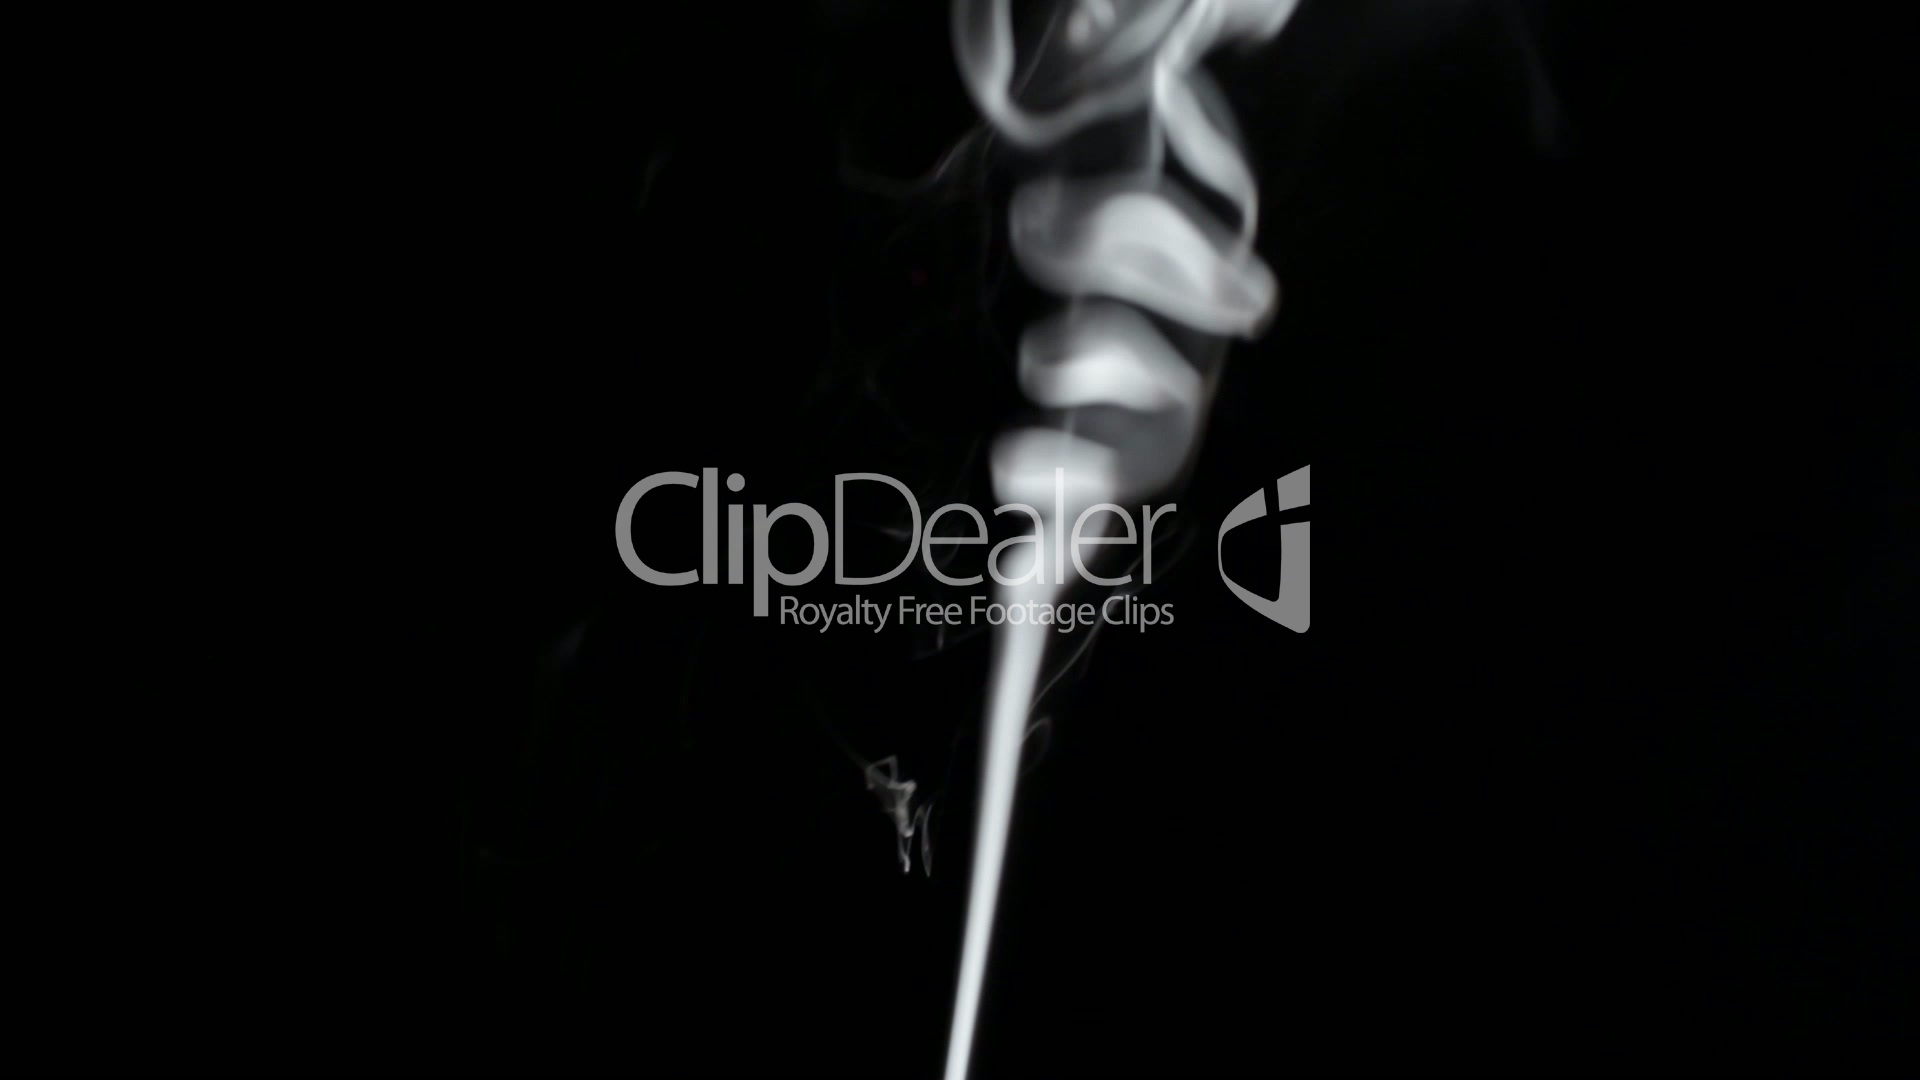 Thin smoke on a black background.: Royalty-free video and stock footage